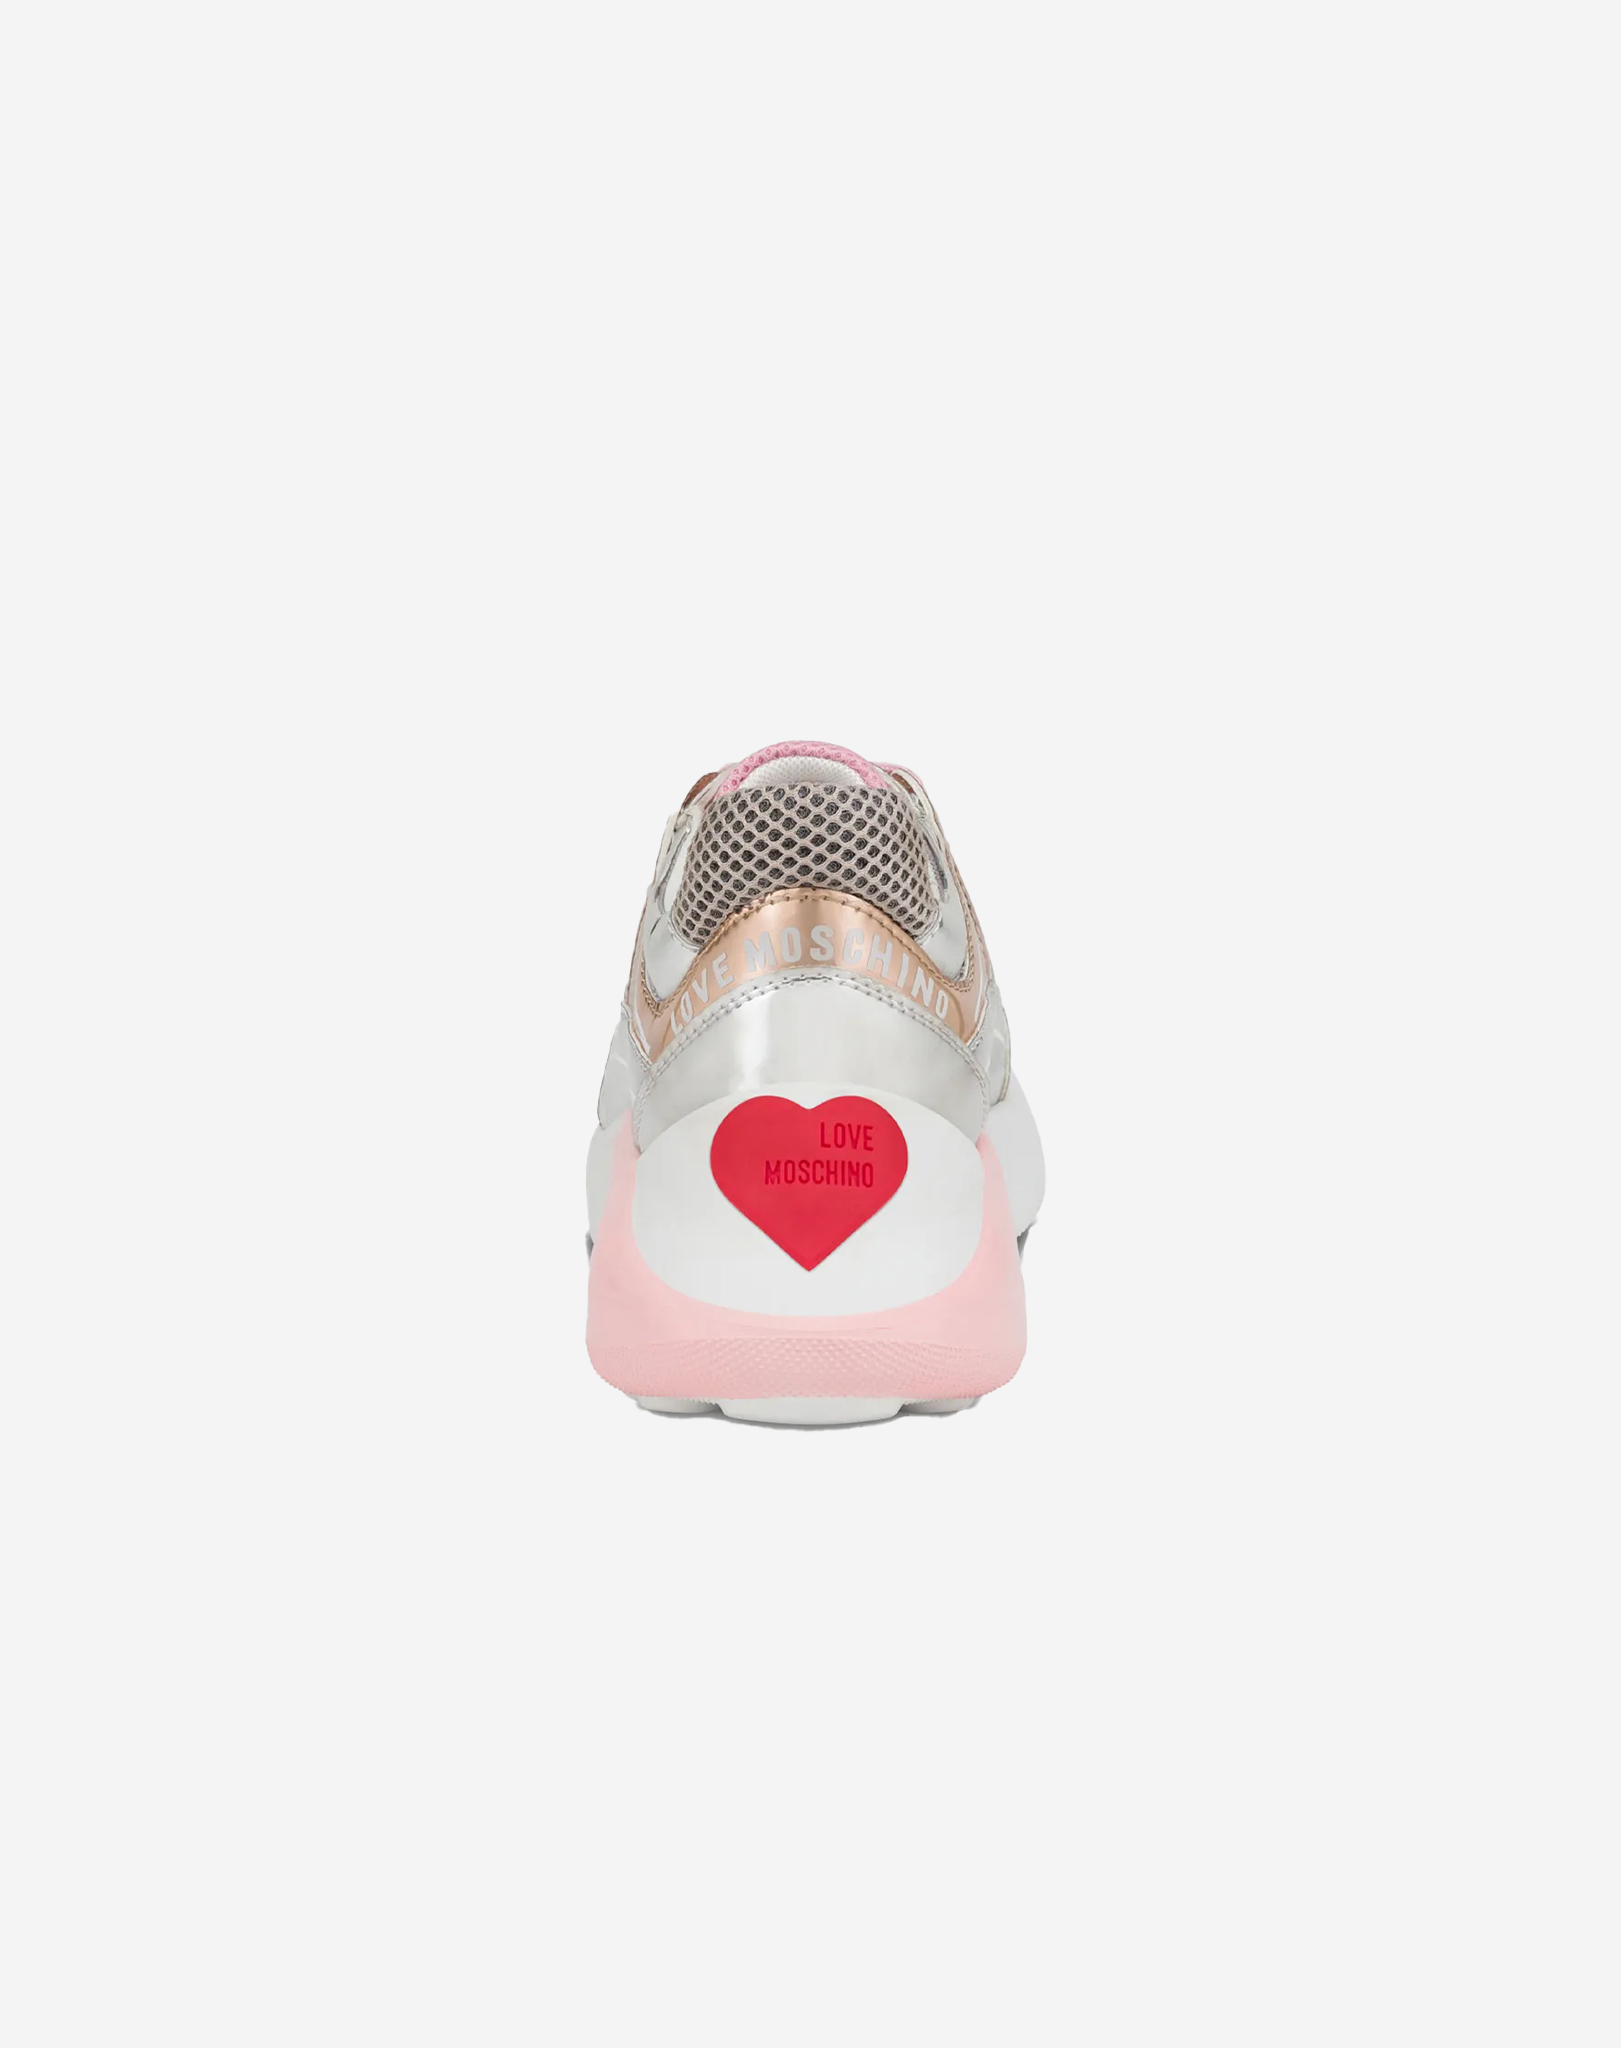 Love Moschino Sneakers Hologram Multicolor